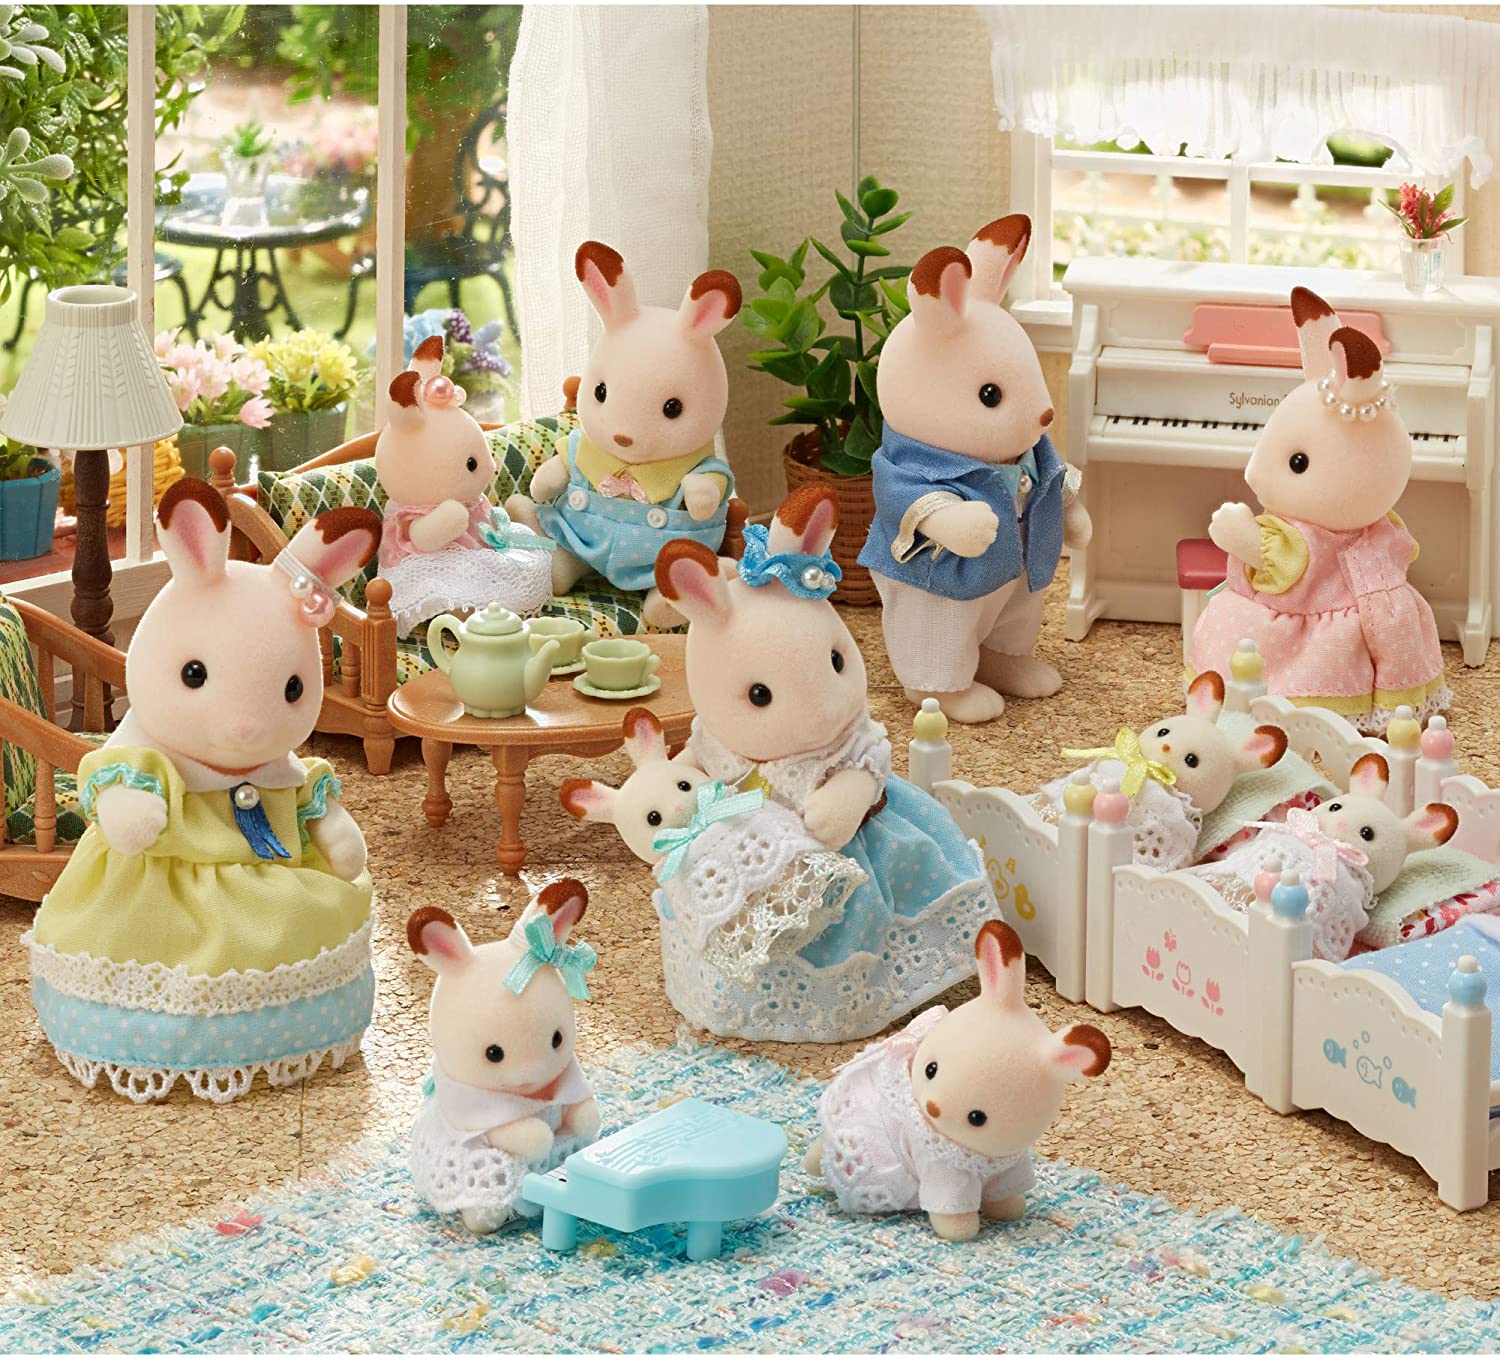 EPOCH Sylvanian Families Deluxe Celebration Home Gift Set Limited Set New 